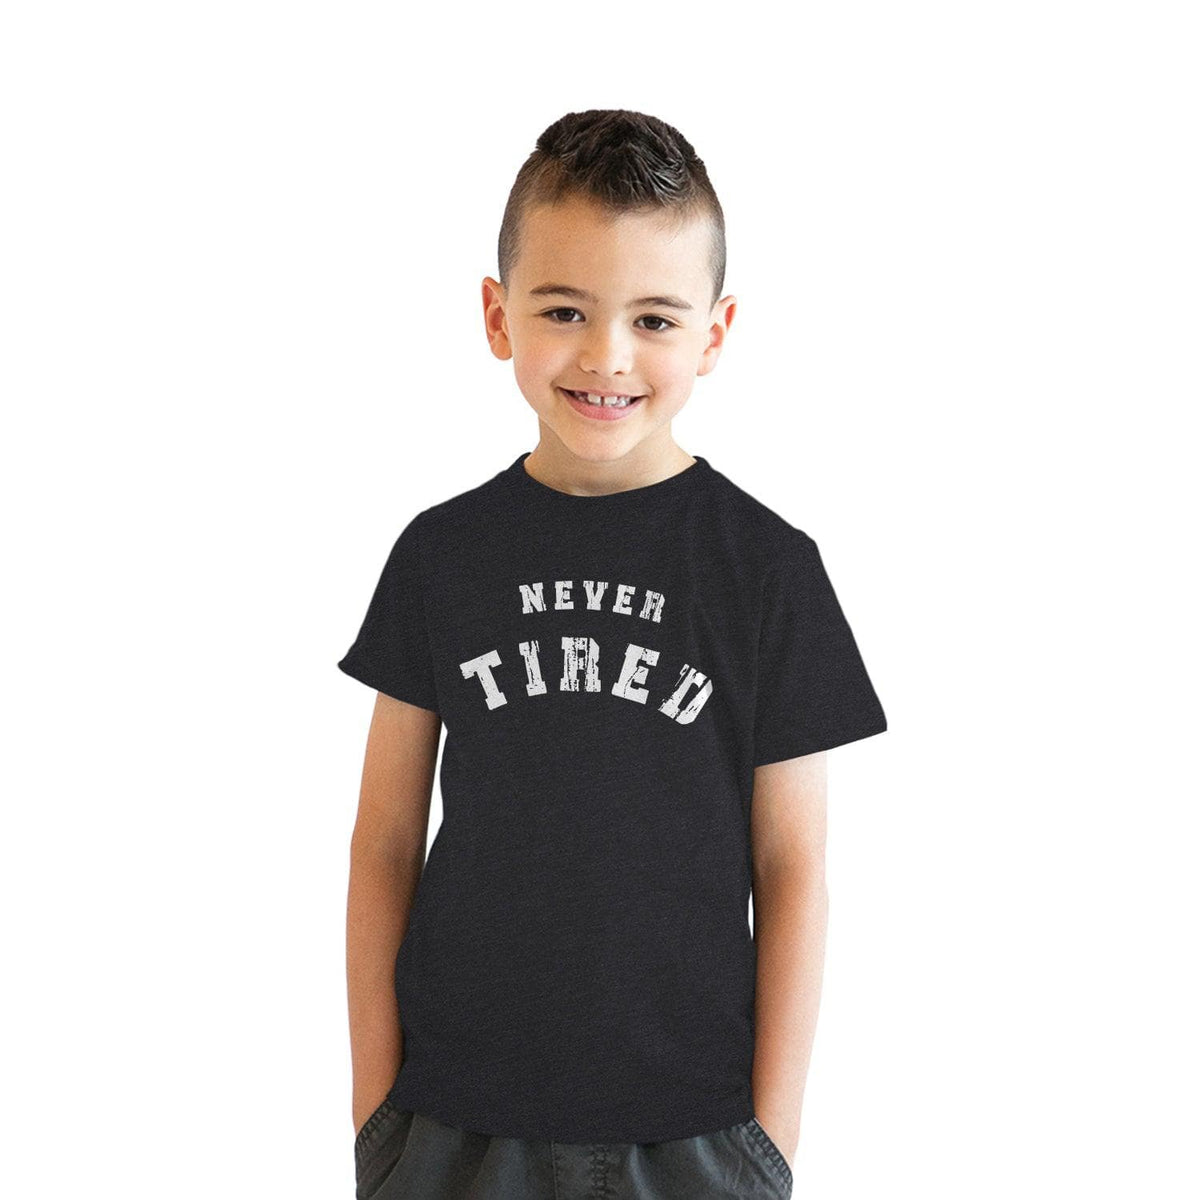 Never Tired Youth Tshirt  -  Crazy Dog T-Shirts